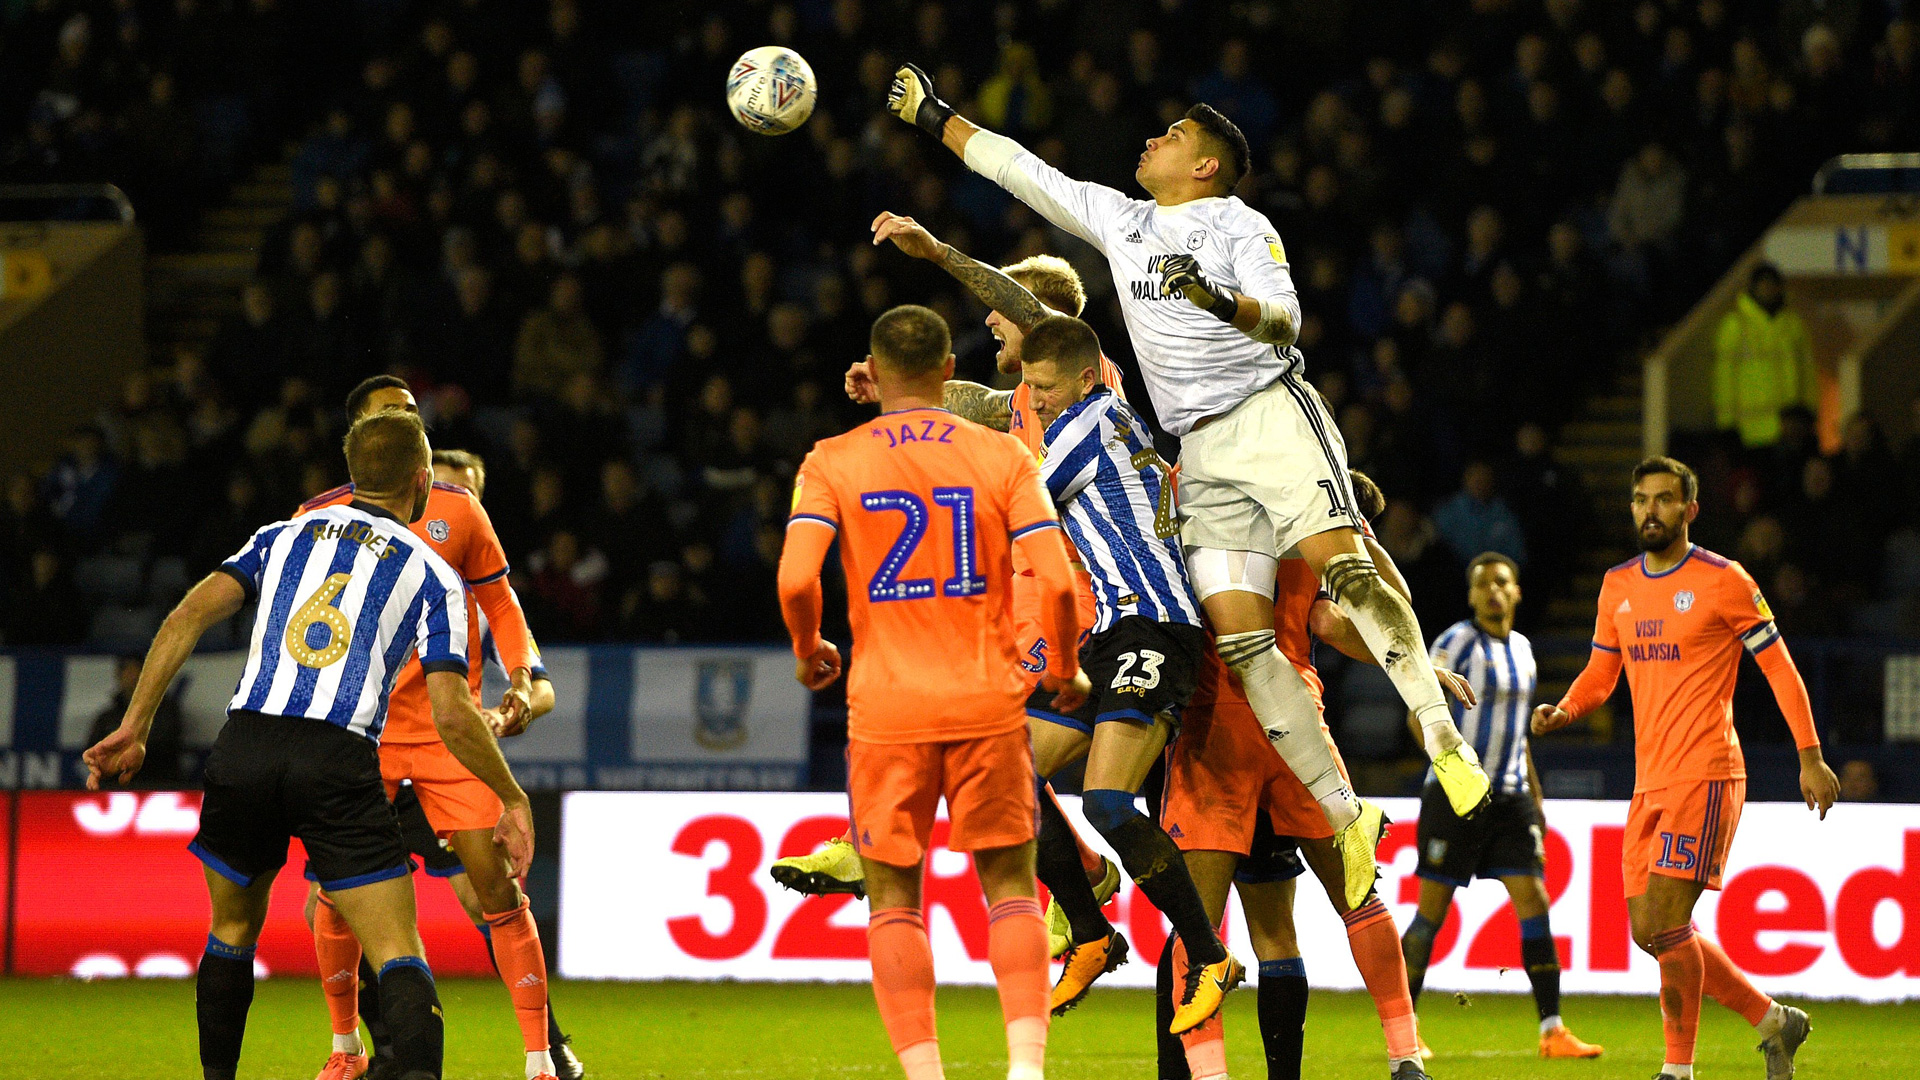 Neil Etheridge makes a smart save for City at Sheffield Wednesday...